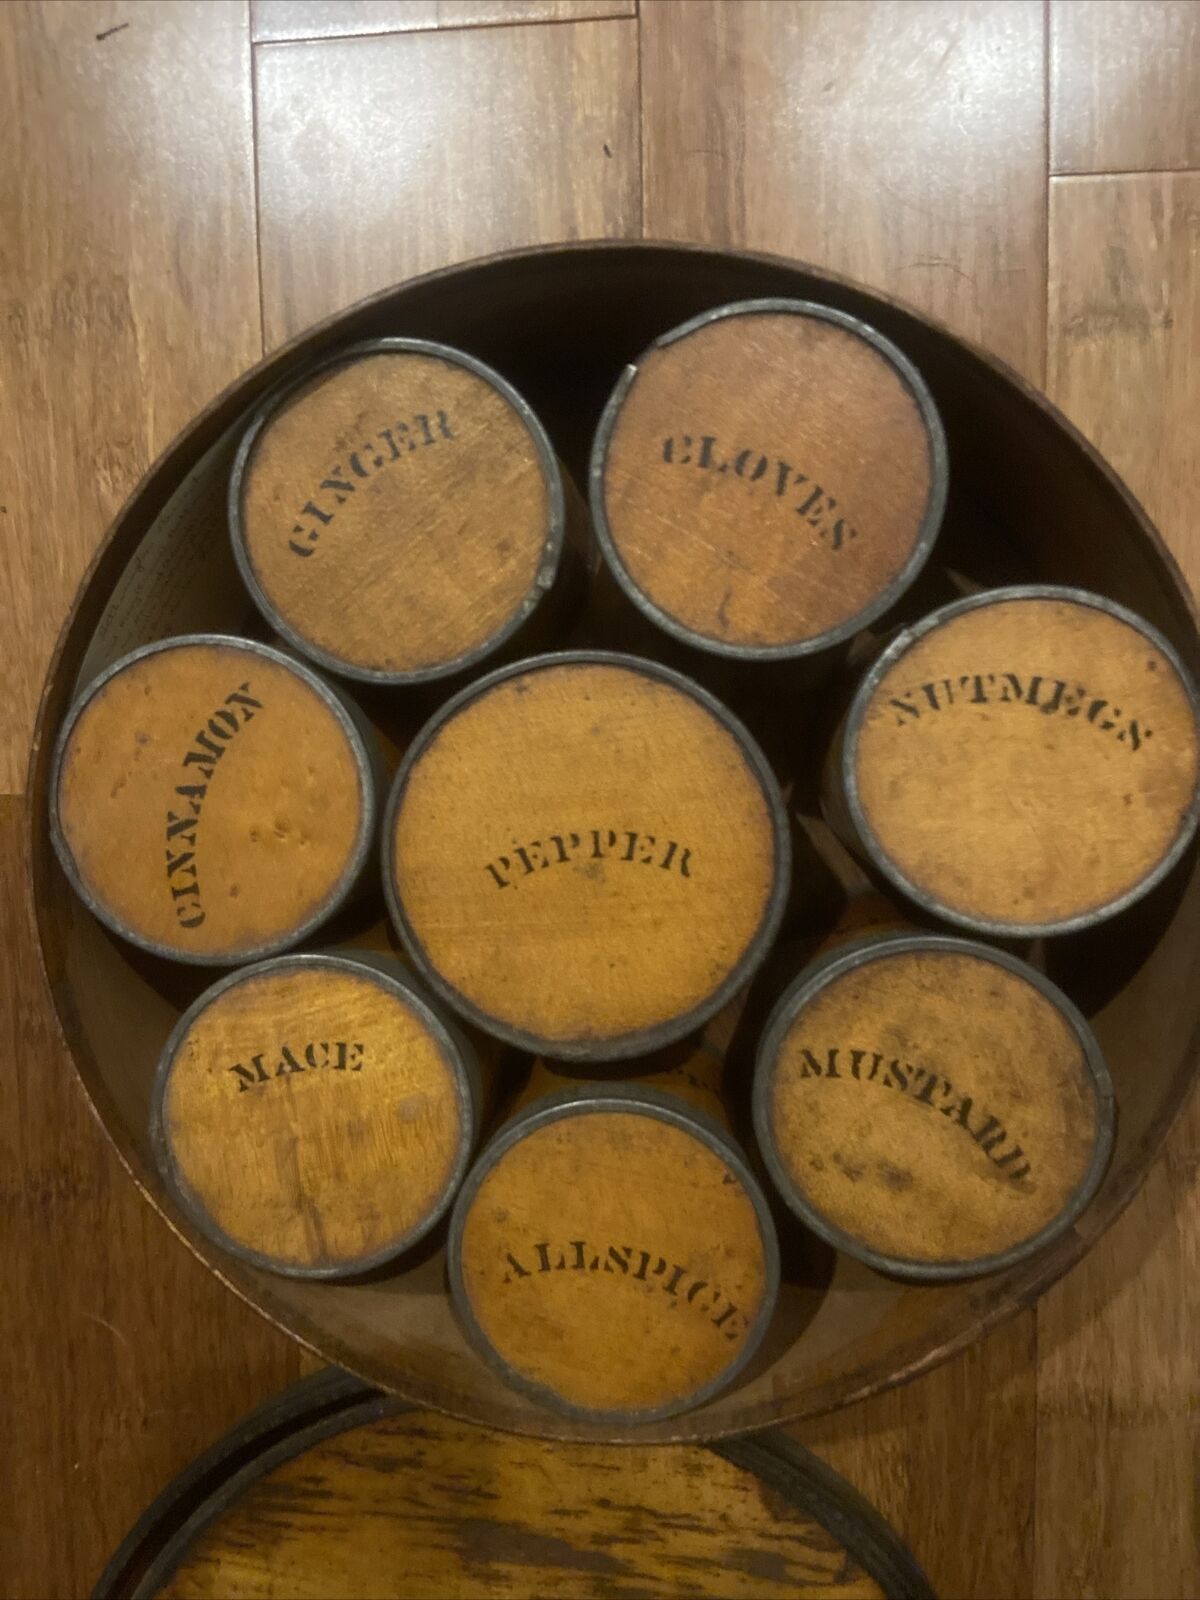 Antique Round Wooden Spice Box From 1870. 8 Total Spice “jars”